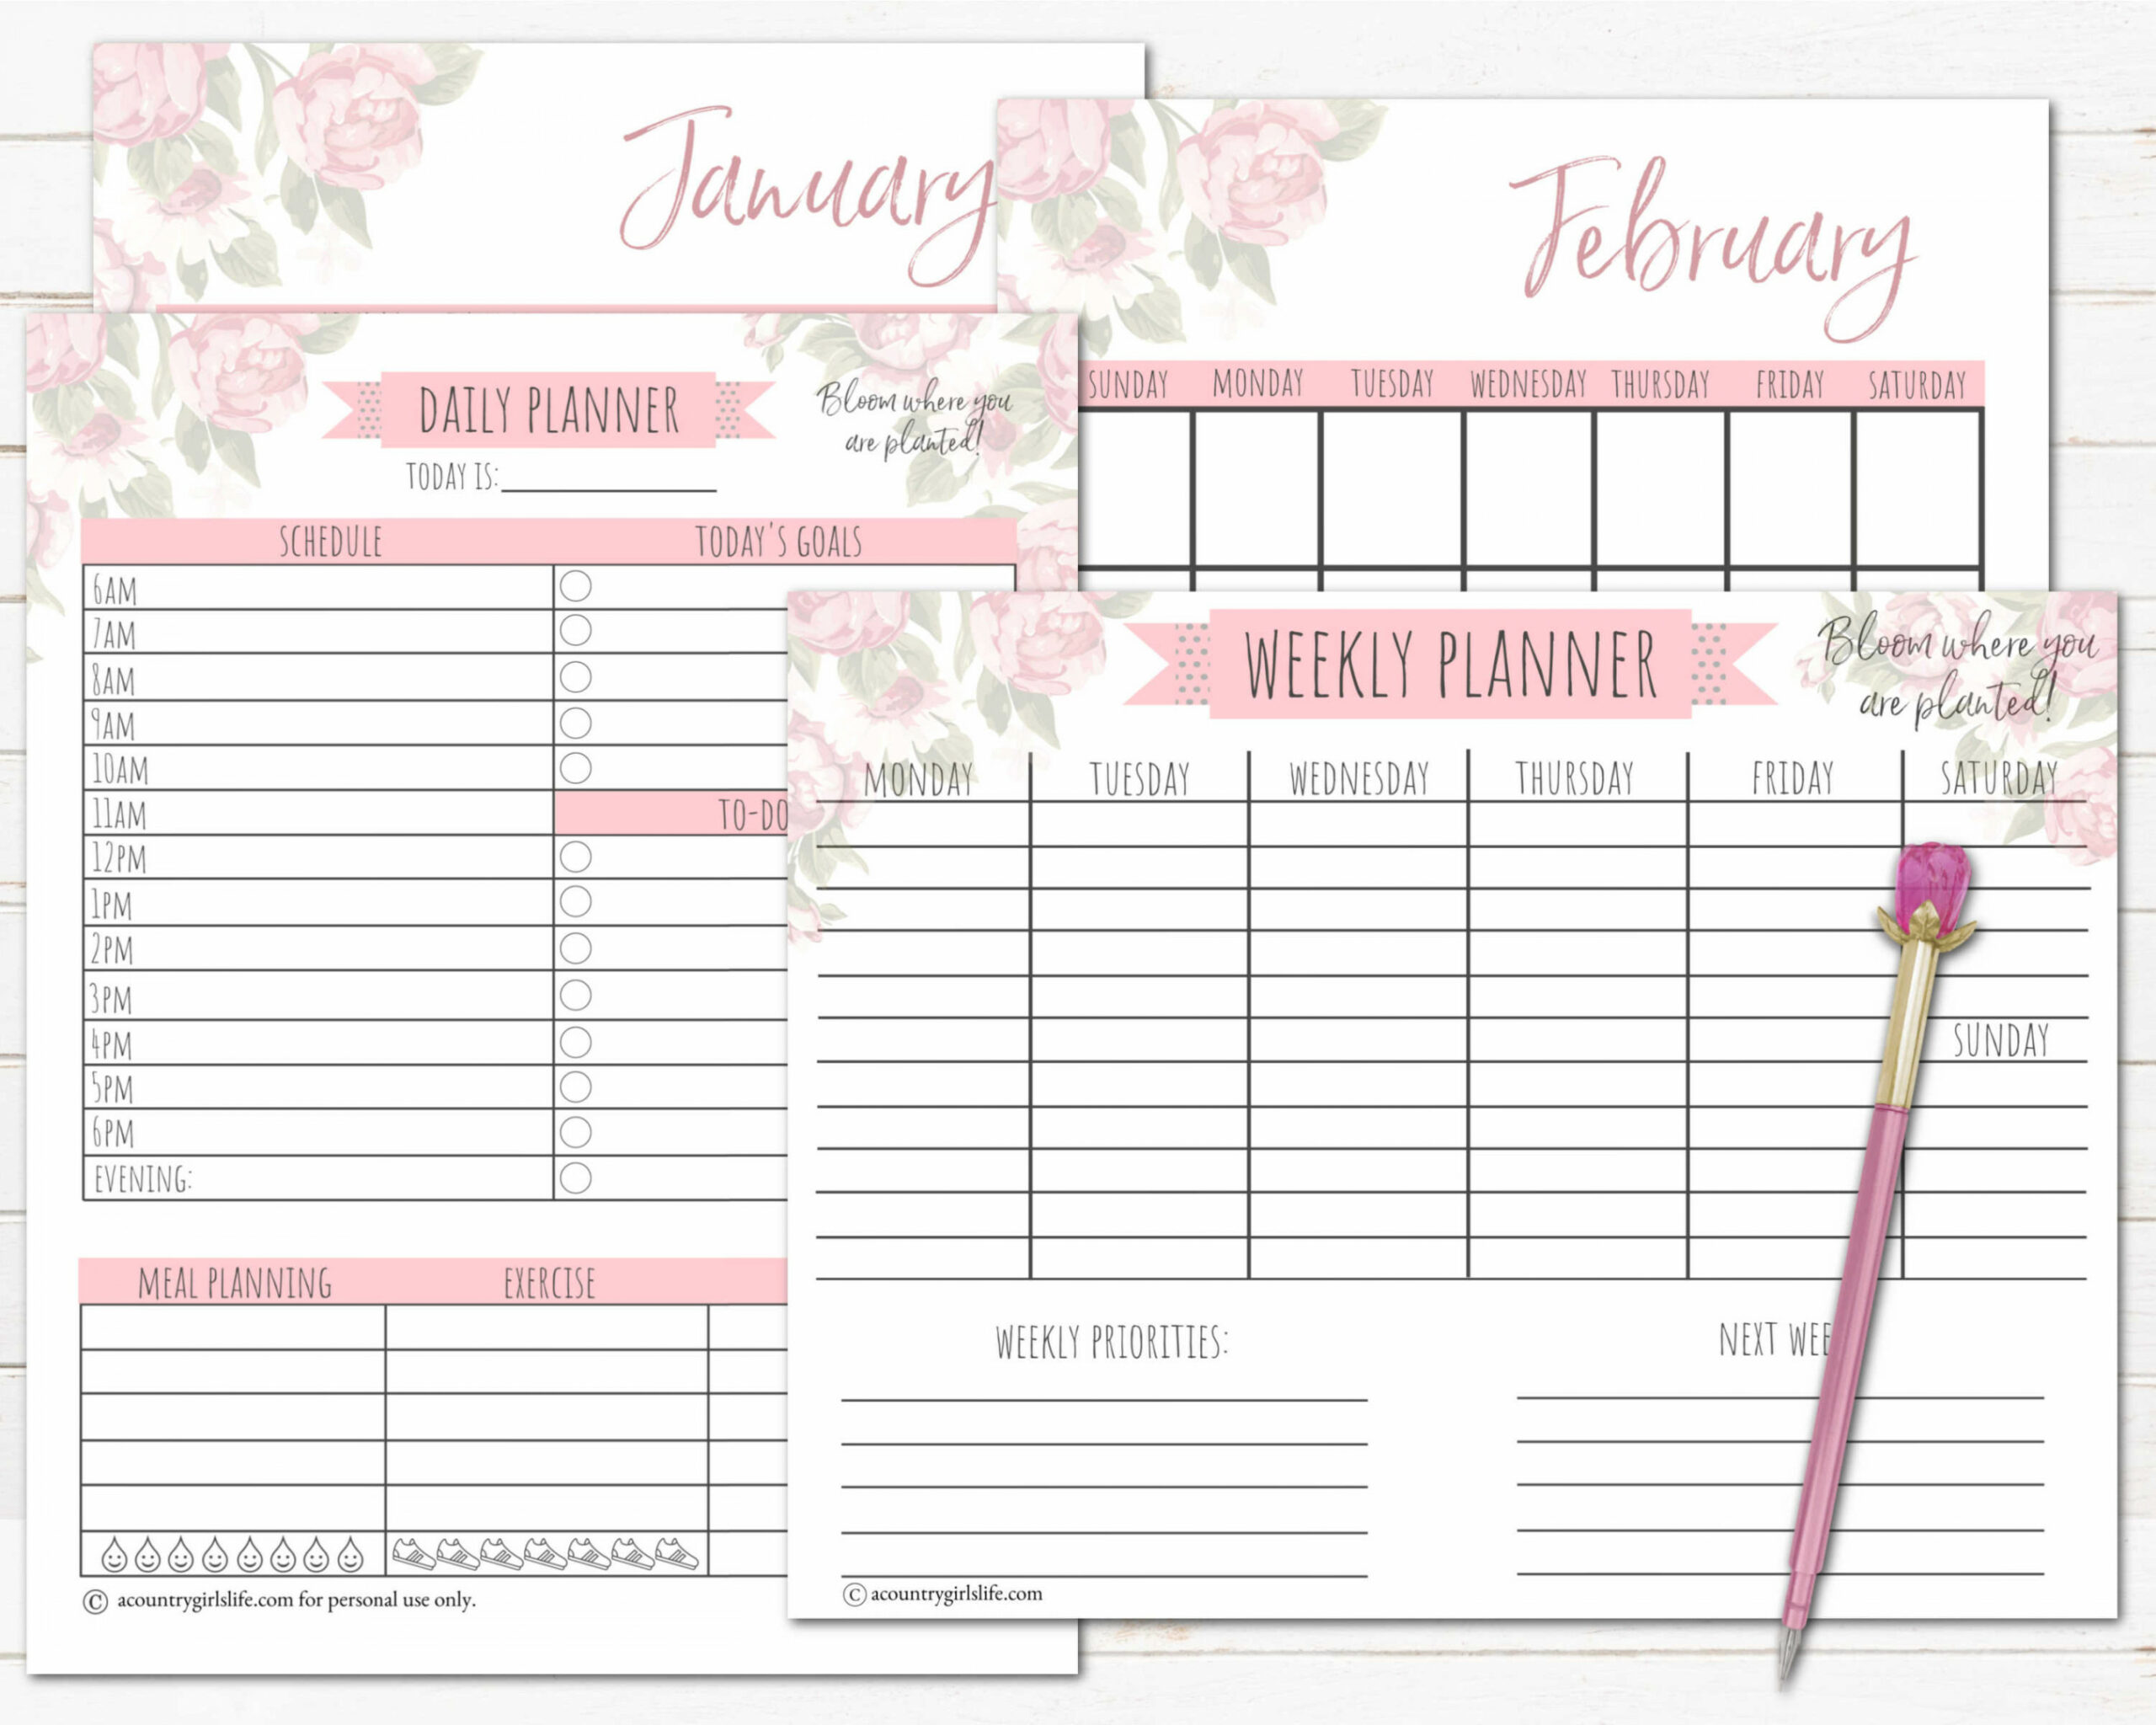 FREE Printable Daily Planner {+FREE Matching Monthly & Weekly